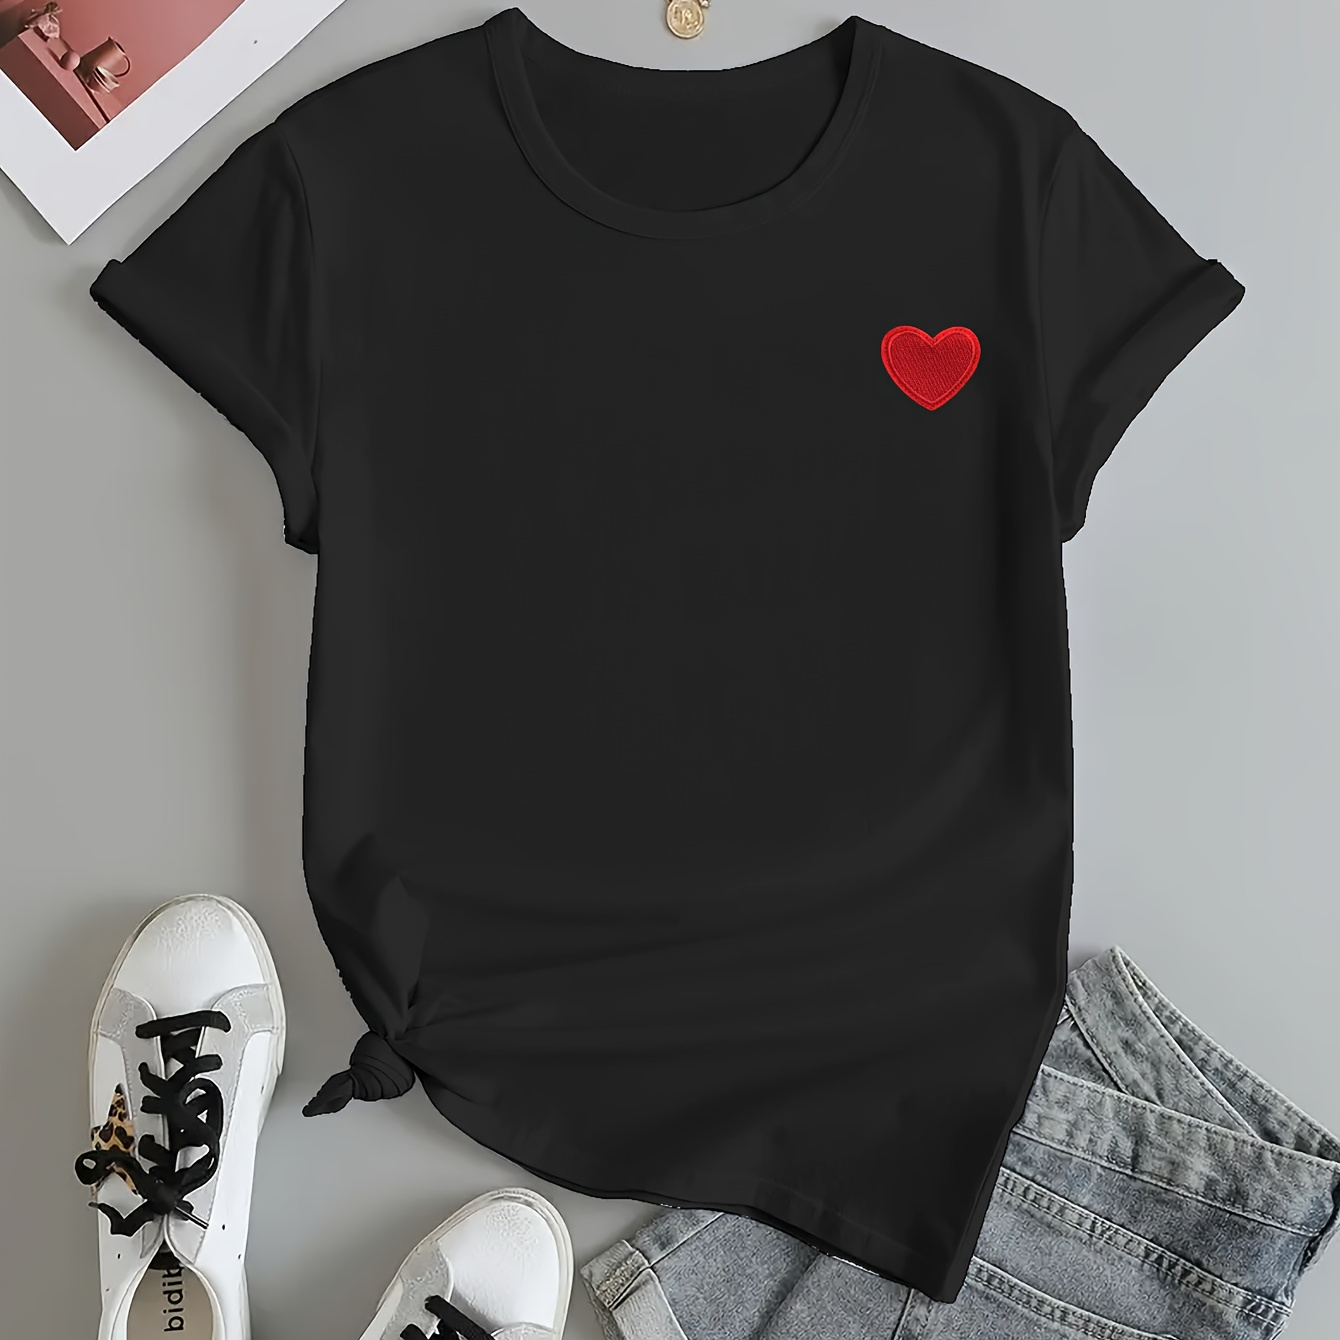 

Heart Embroidered T-shirt, Casual Short Sleeve T-shirt For Spring & Summer, Women's Clothing